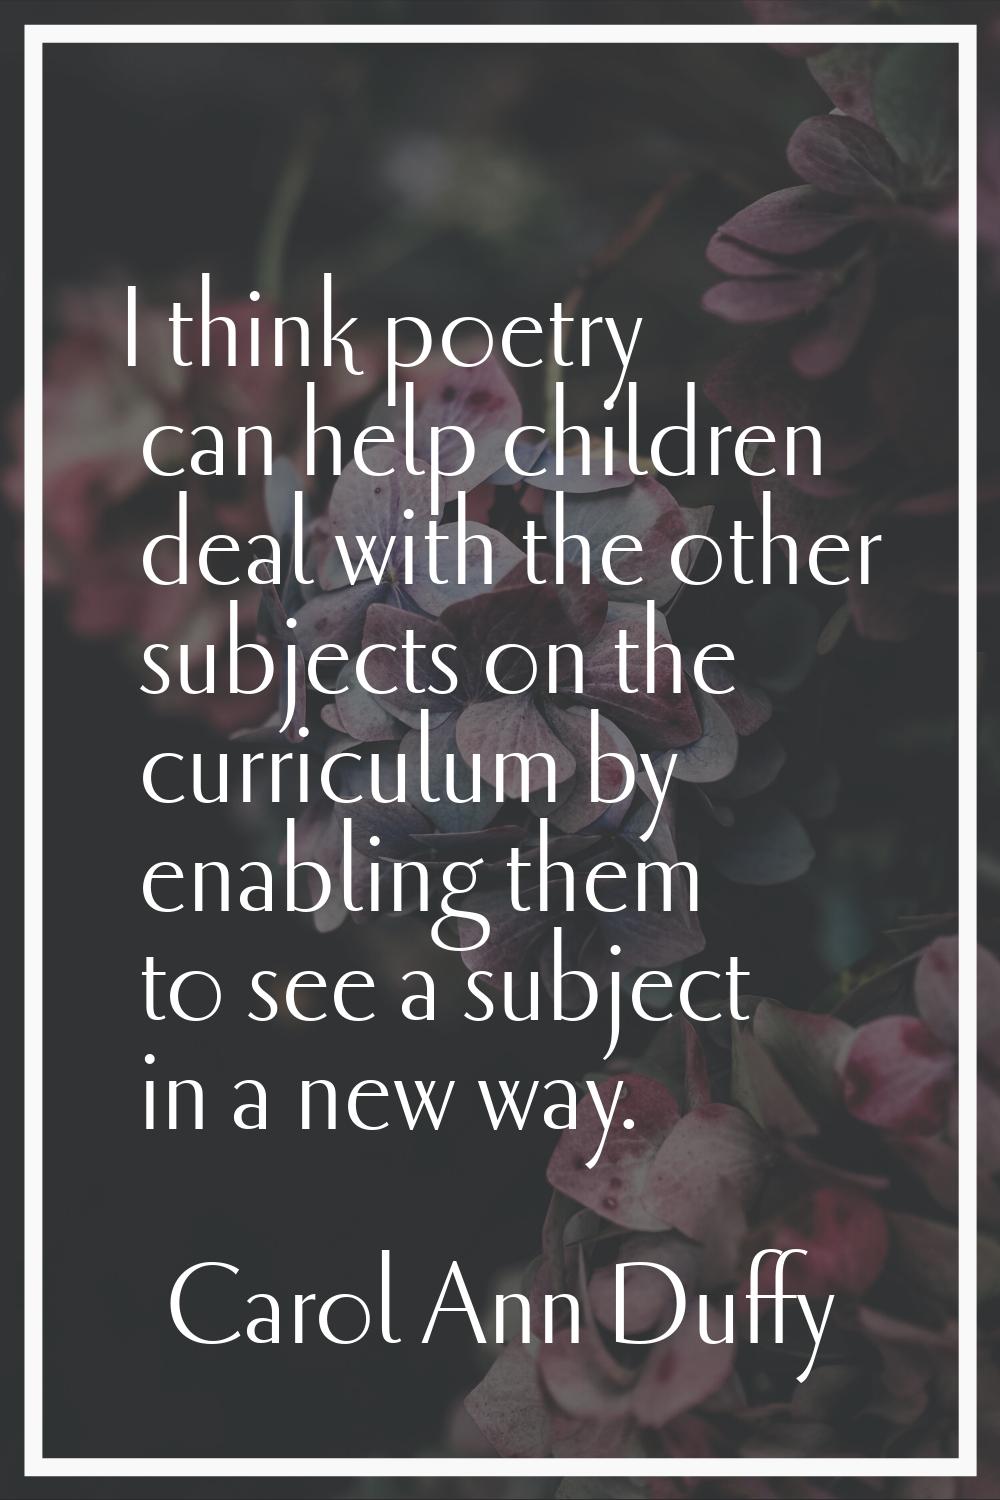 I think poetry can help children deal with the other subjects on the curriculum by enabling them to